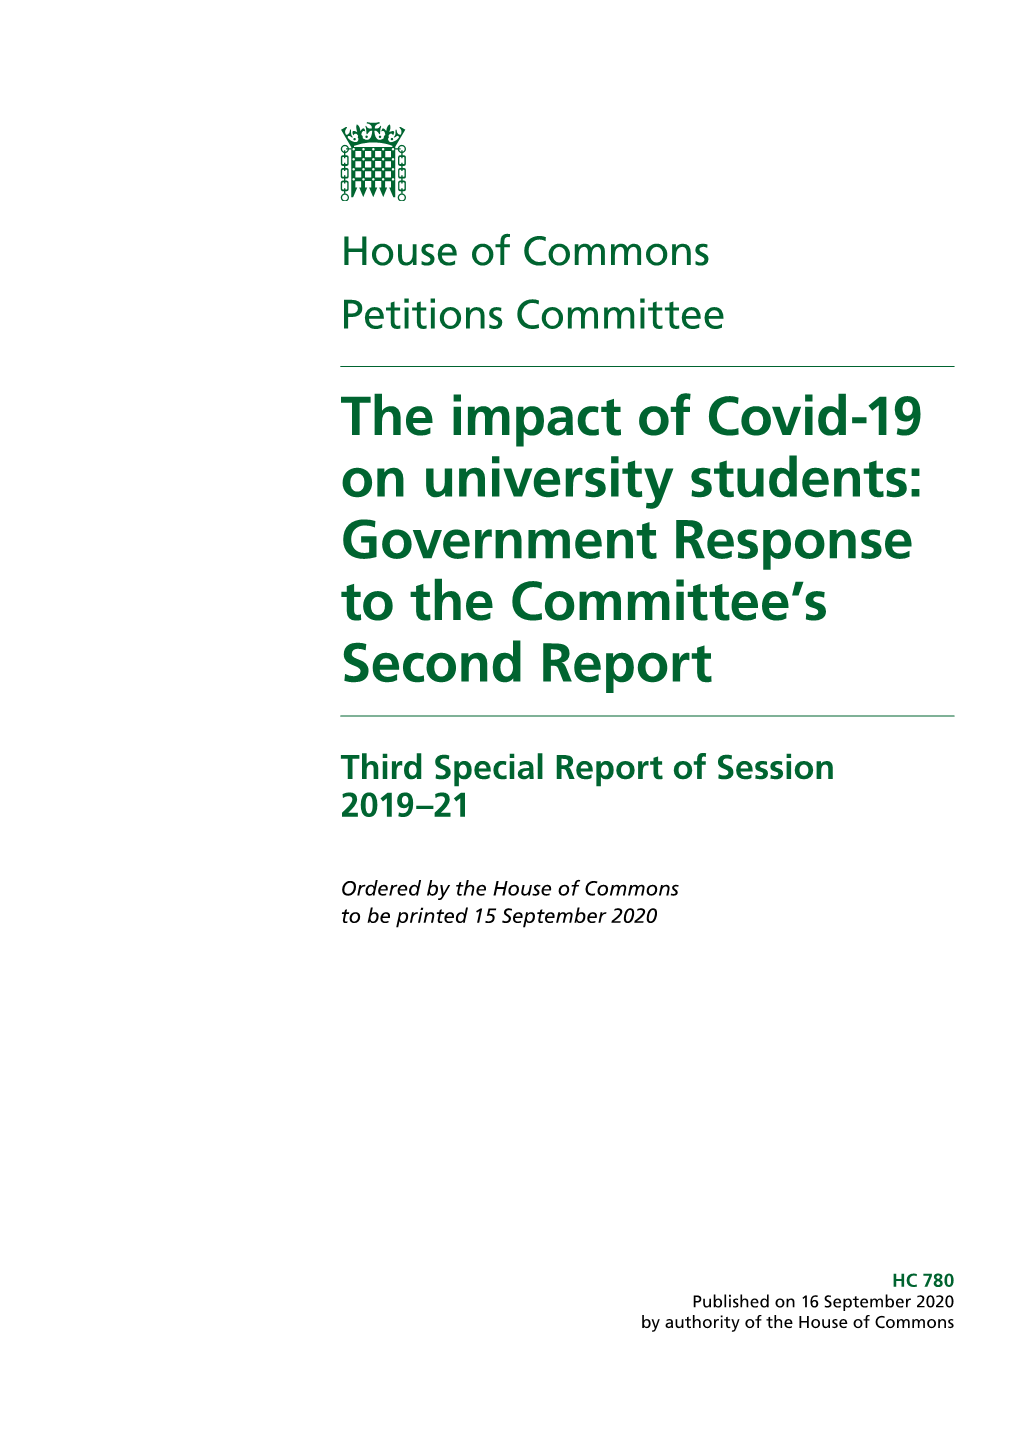 The Impact of Covid-19 on University Students: Government Response to the Committee’S Second Report